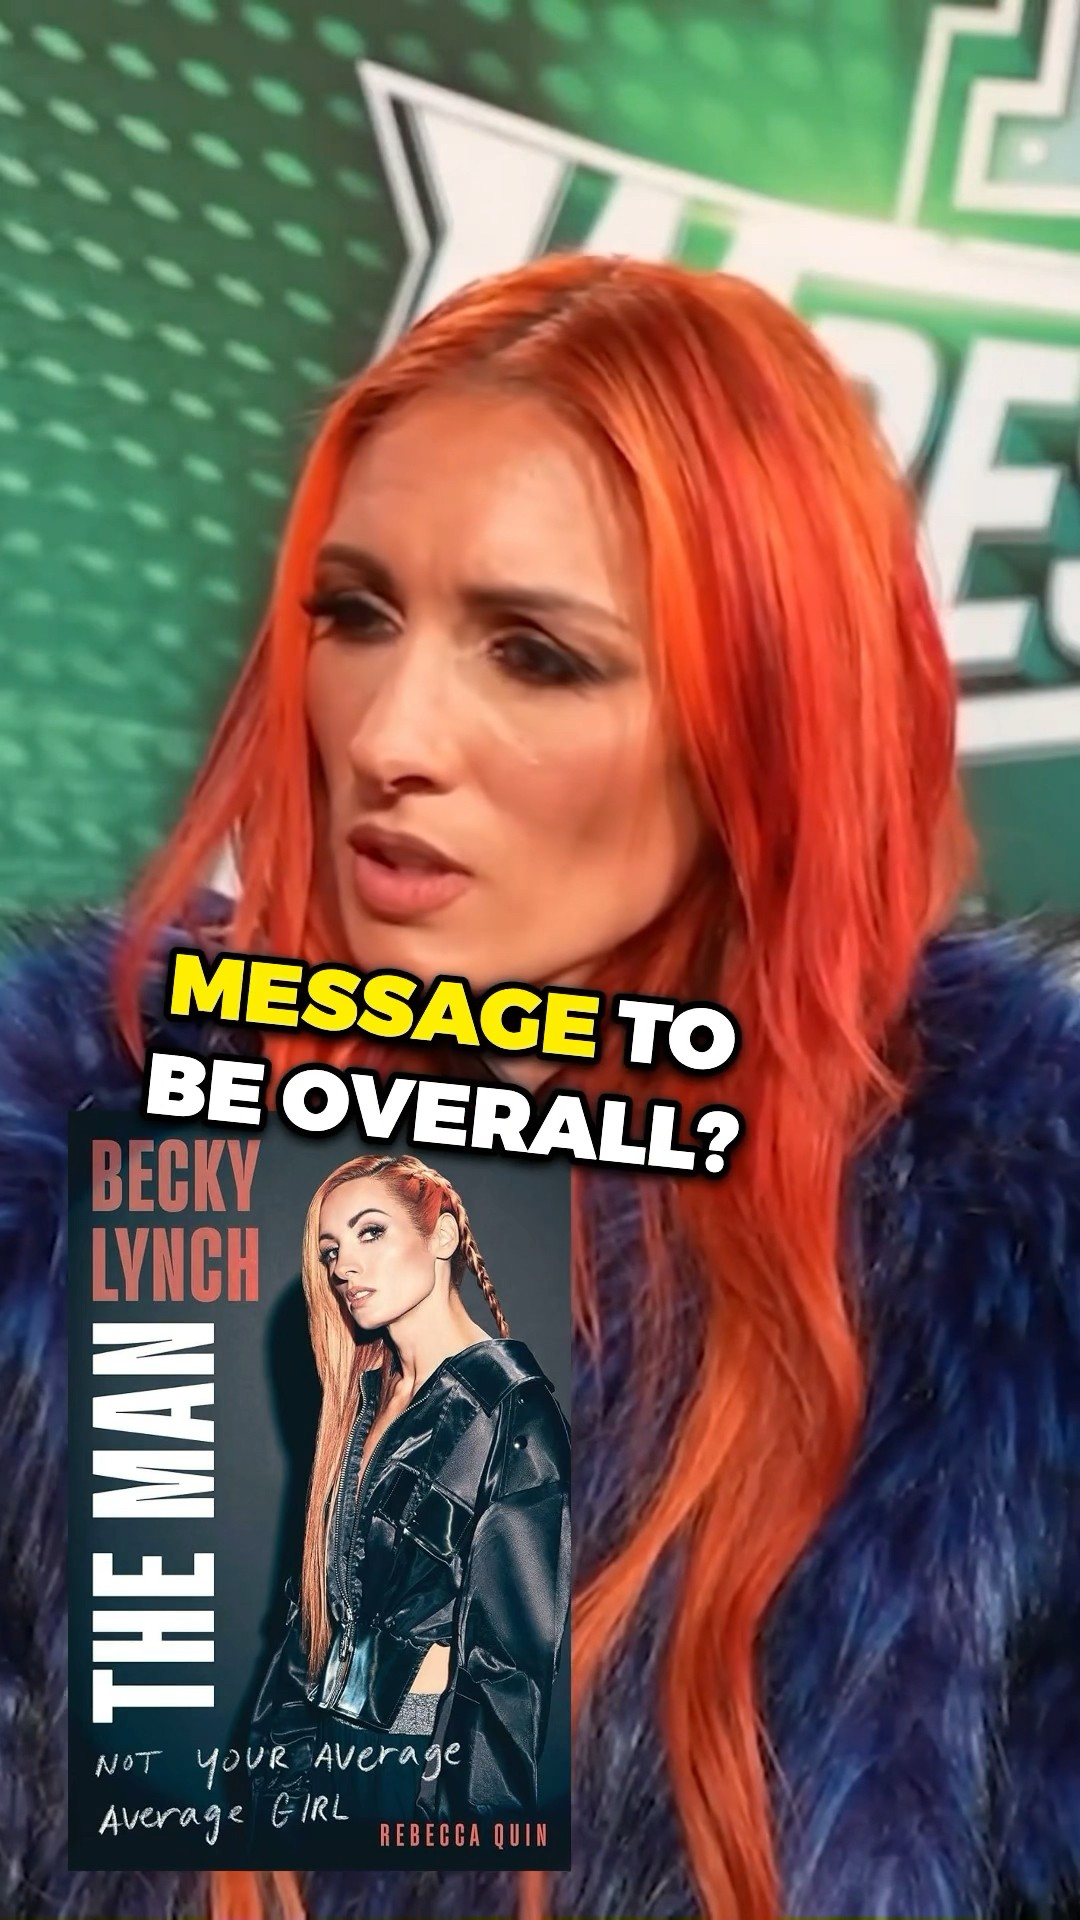 Becky Lynch wants this to be the message of her book